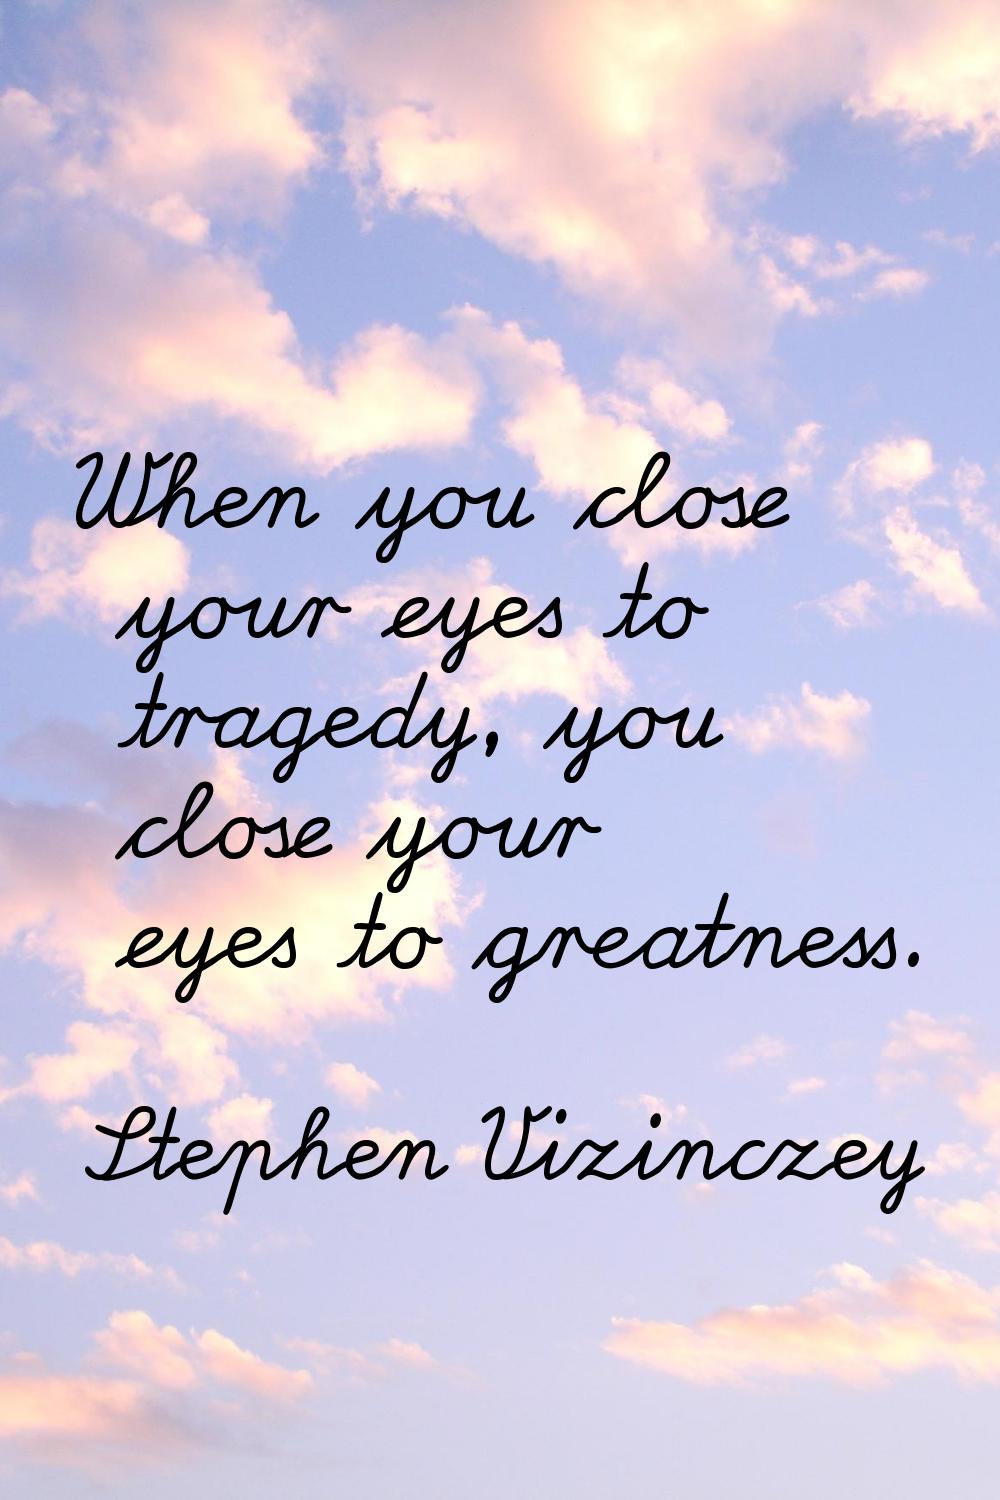 When you close your eyes to tragedy, you close your eyes to greatness.